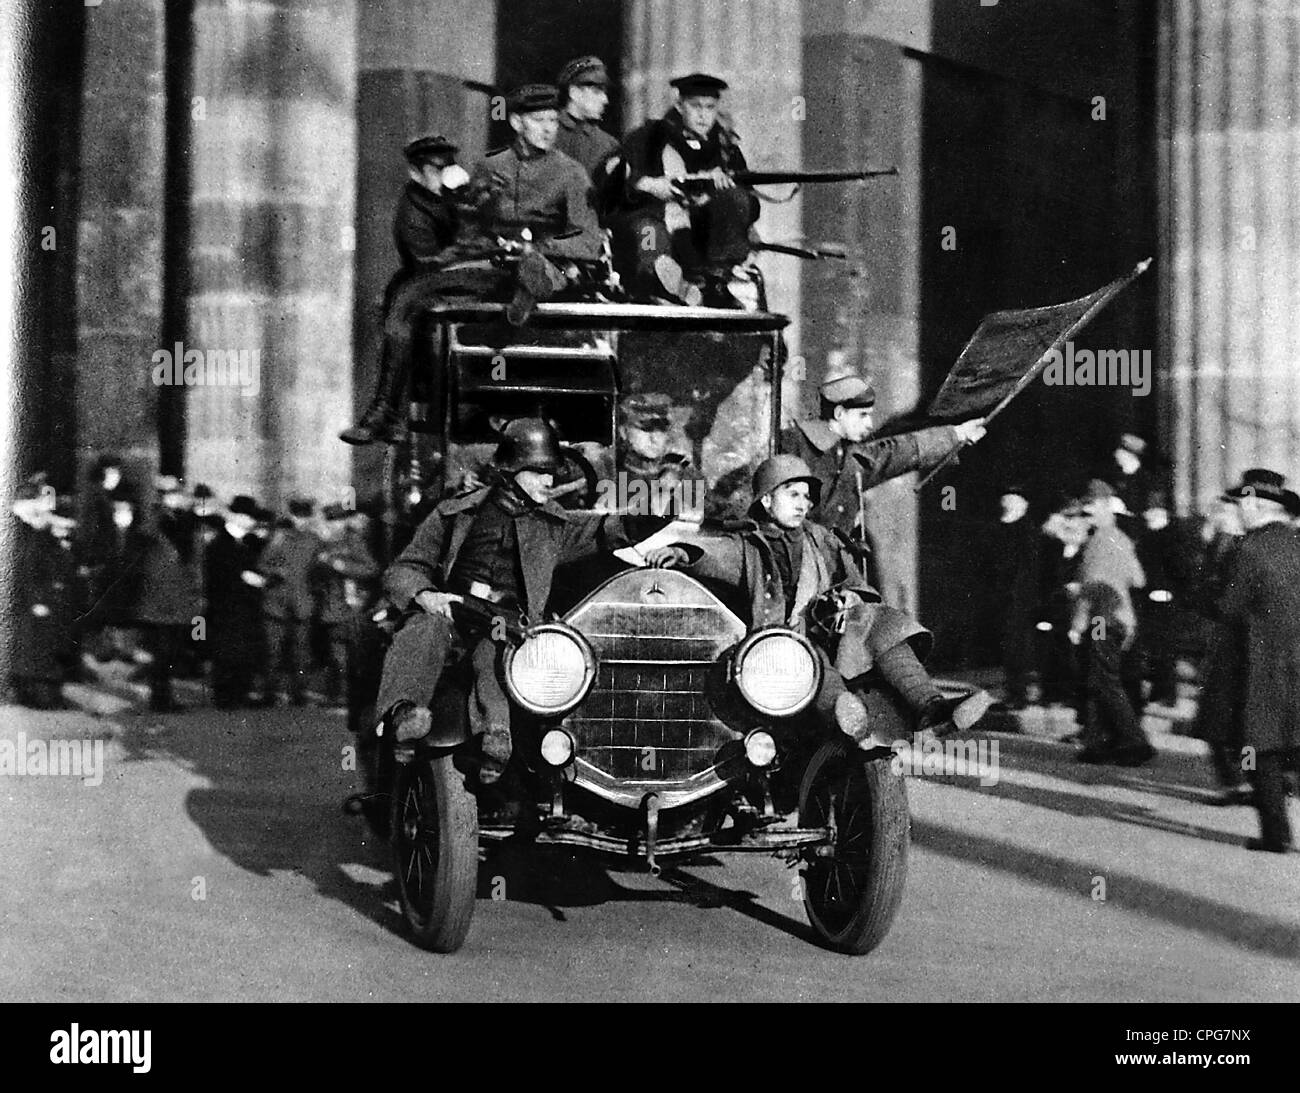 events, German Revolution of 1918/1919, car with revolutionaries, at the Brandenburg Gate, Berlin, 9.11.1918, Germany, German Empire, Reich, end of First World War, WWI, uprising, revolt, 1910s, historic, historical, 10s, 20th century, flag, people, Additional-Rights-Clearences-Not Available Stock Photo